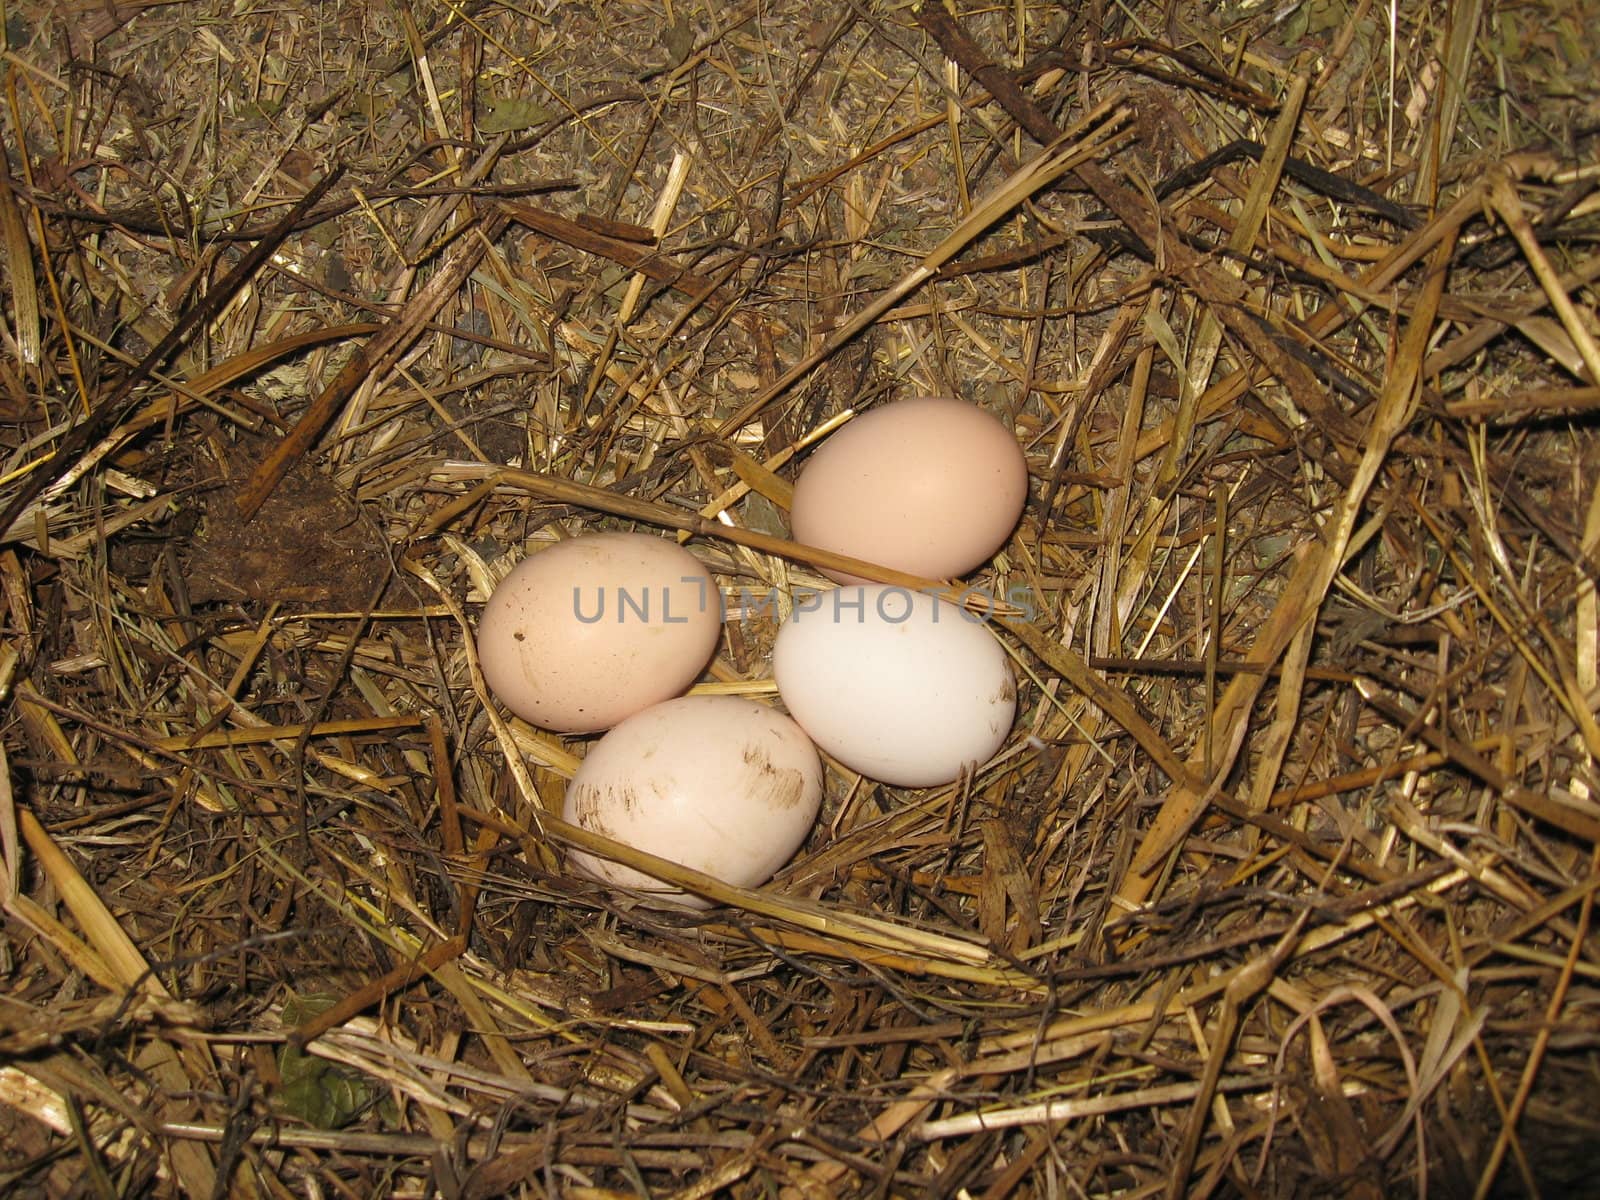 Nest of the hen with eggs on the hay